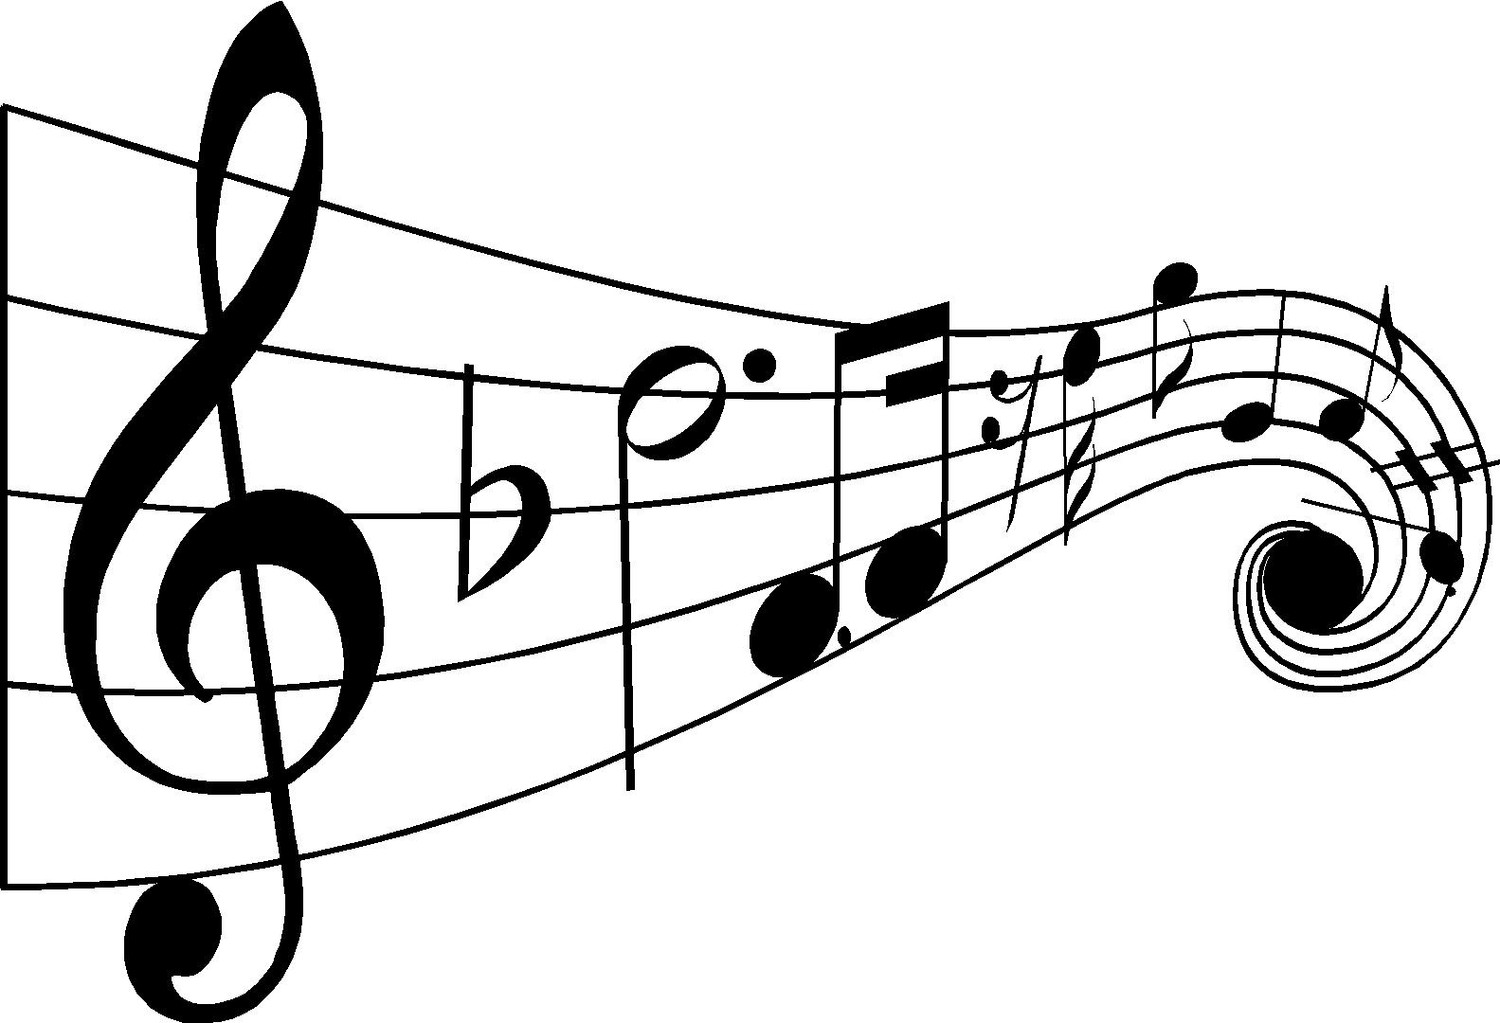 Which Musical Note Are You? | PlayBuzz